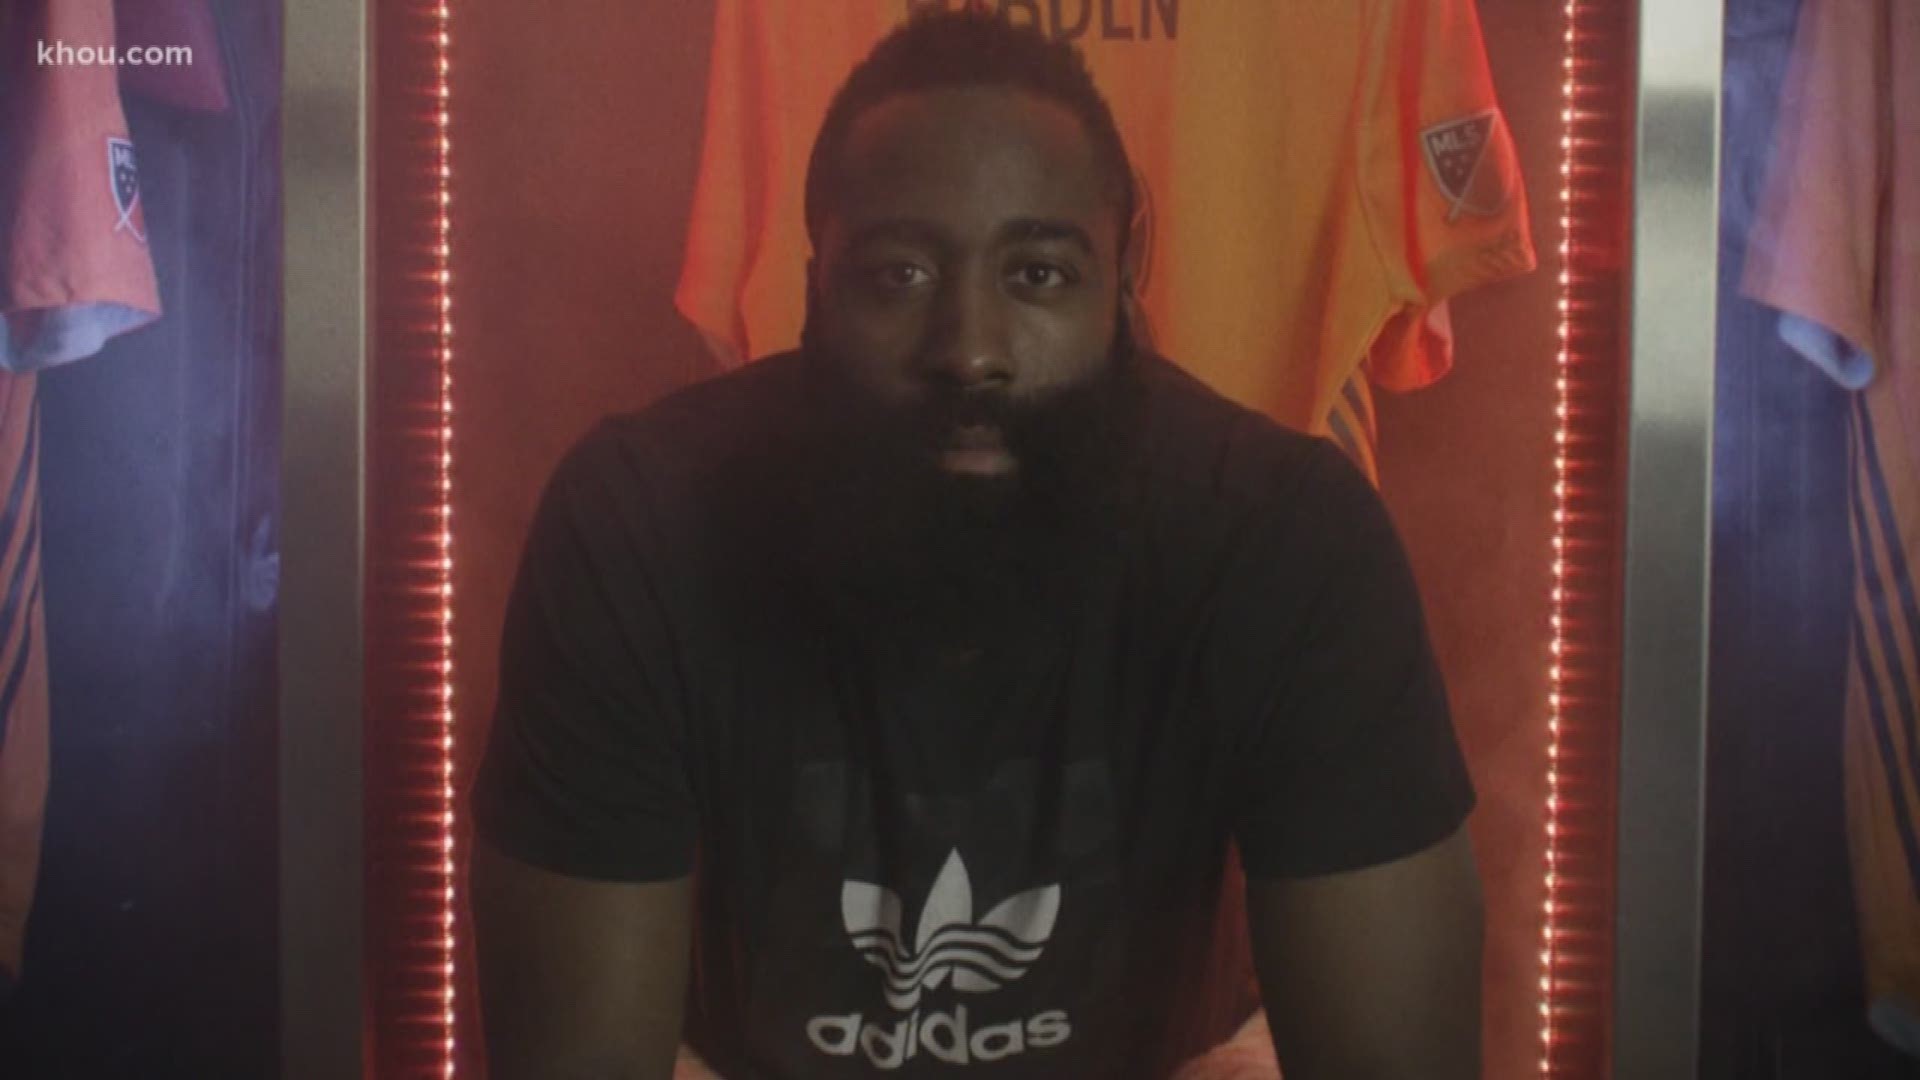 James Harden has joined the ownership group of the Houston Dynamo, Houston DASH and BBVA Stadium, the Rockets star confirmed Tuesday along with the Houston Dynamo.